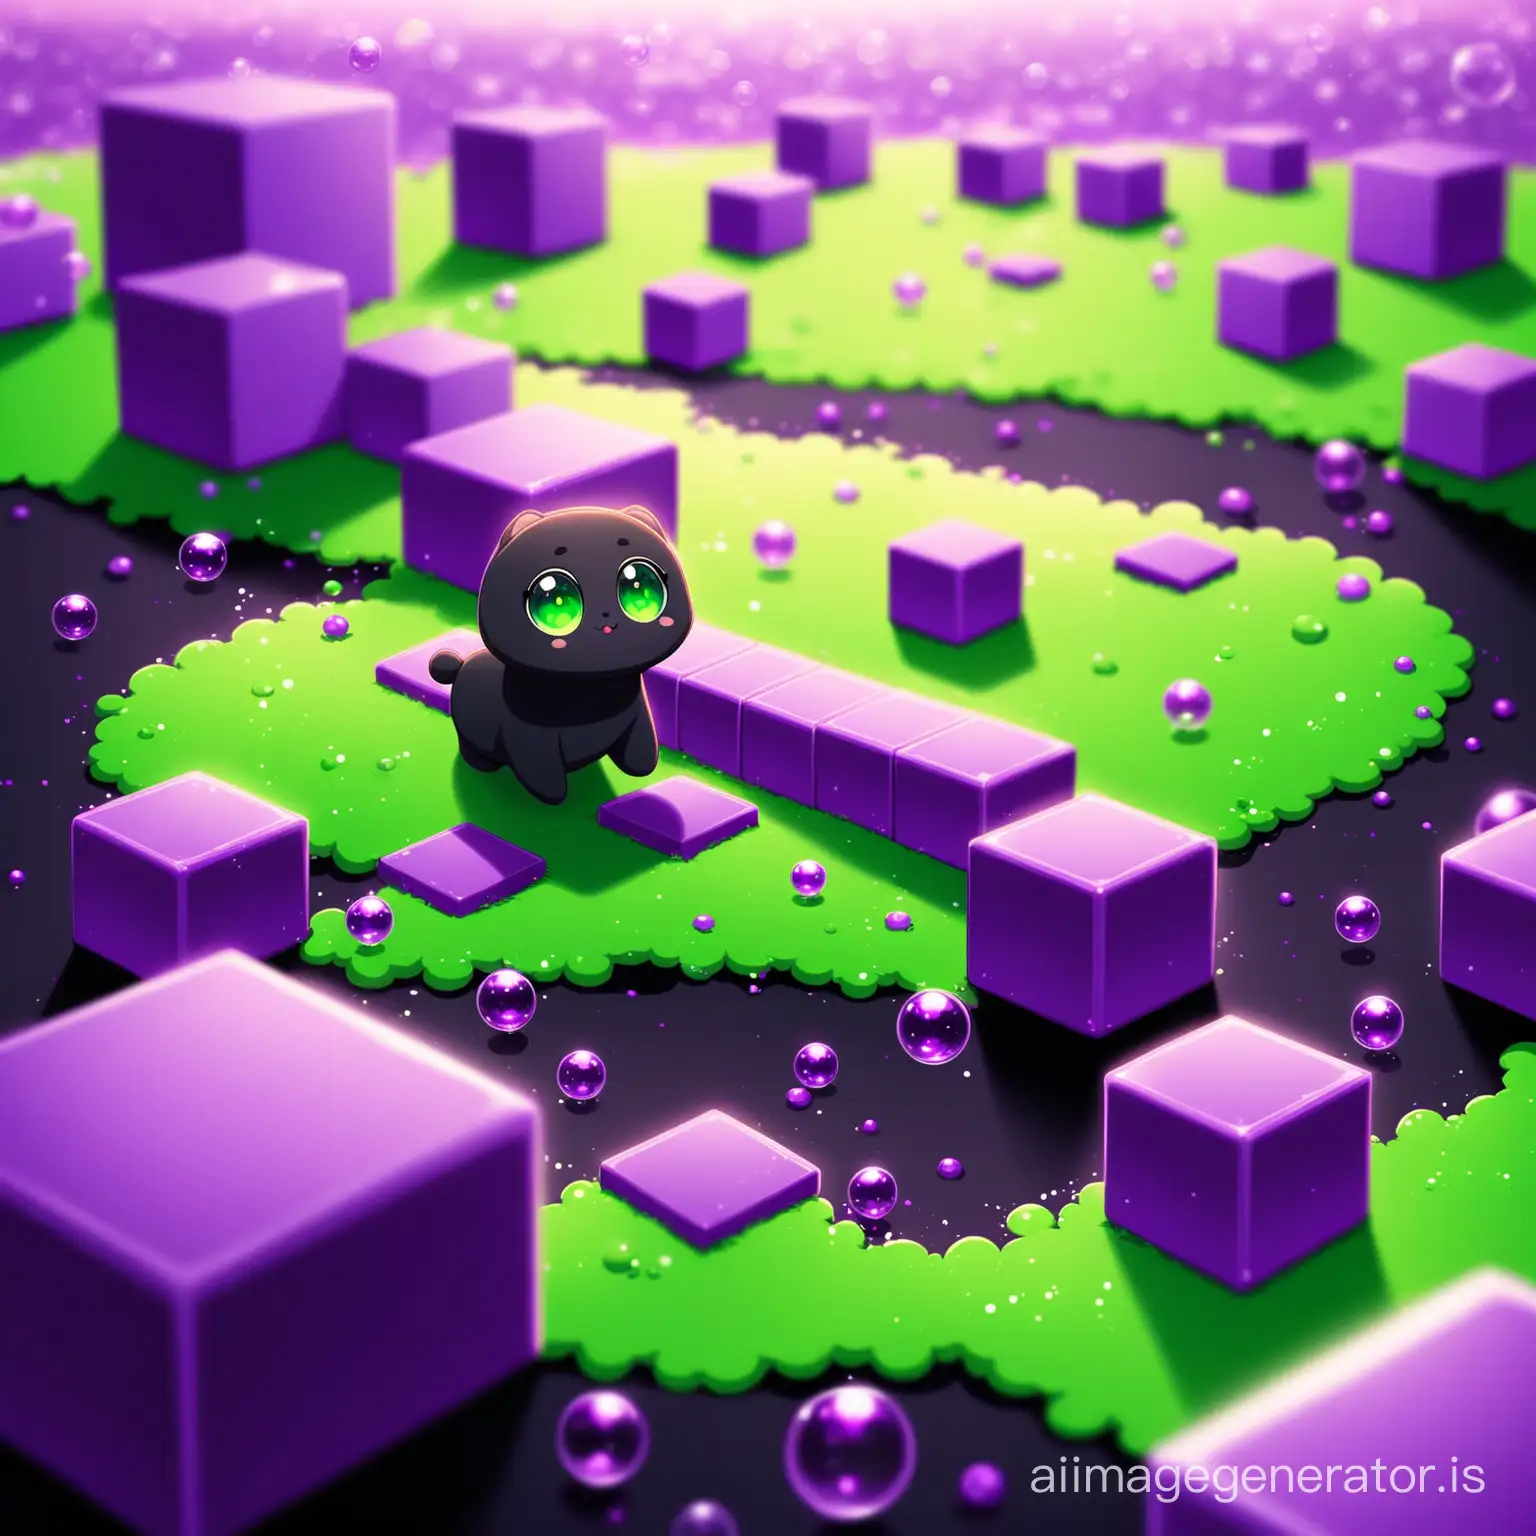  a small black cute cookie with green eyes walking in the land of purple 
Bubbles are scattered in the environment
also little purple blocks fell on the floor
Details are evident beautifully and with great precision
